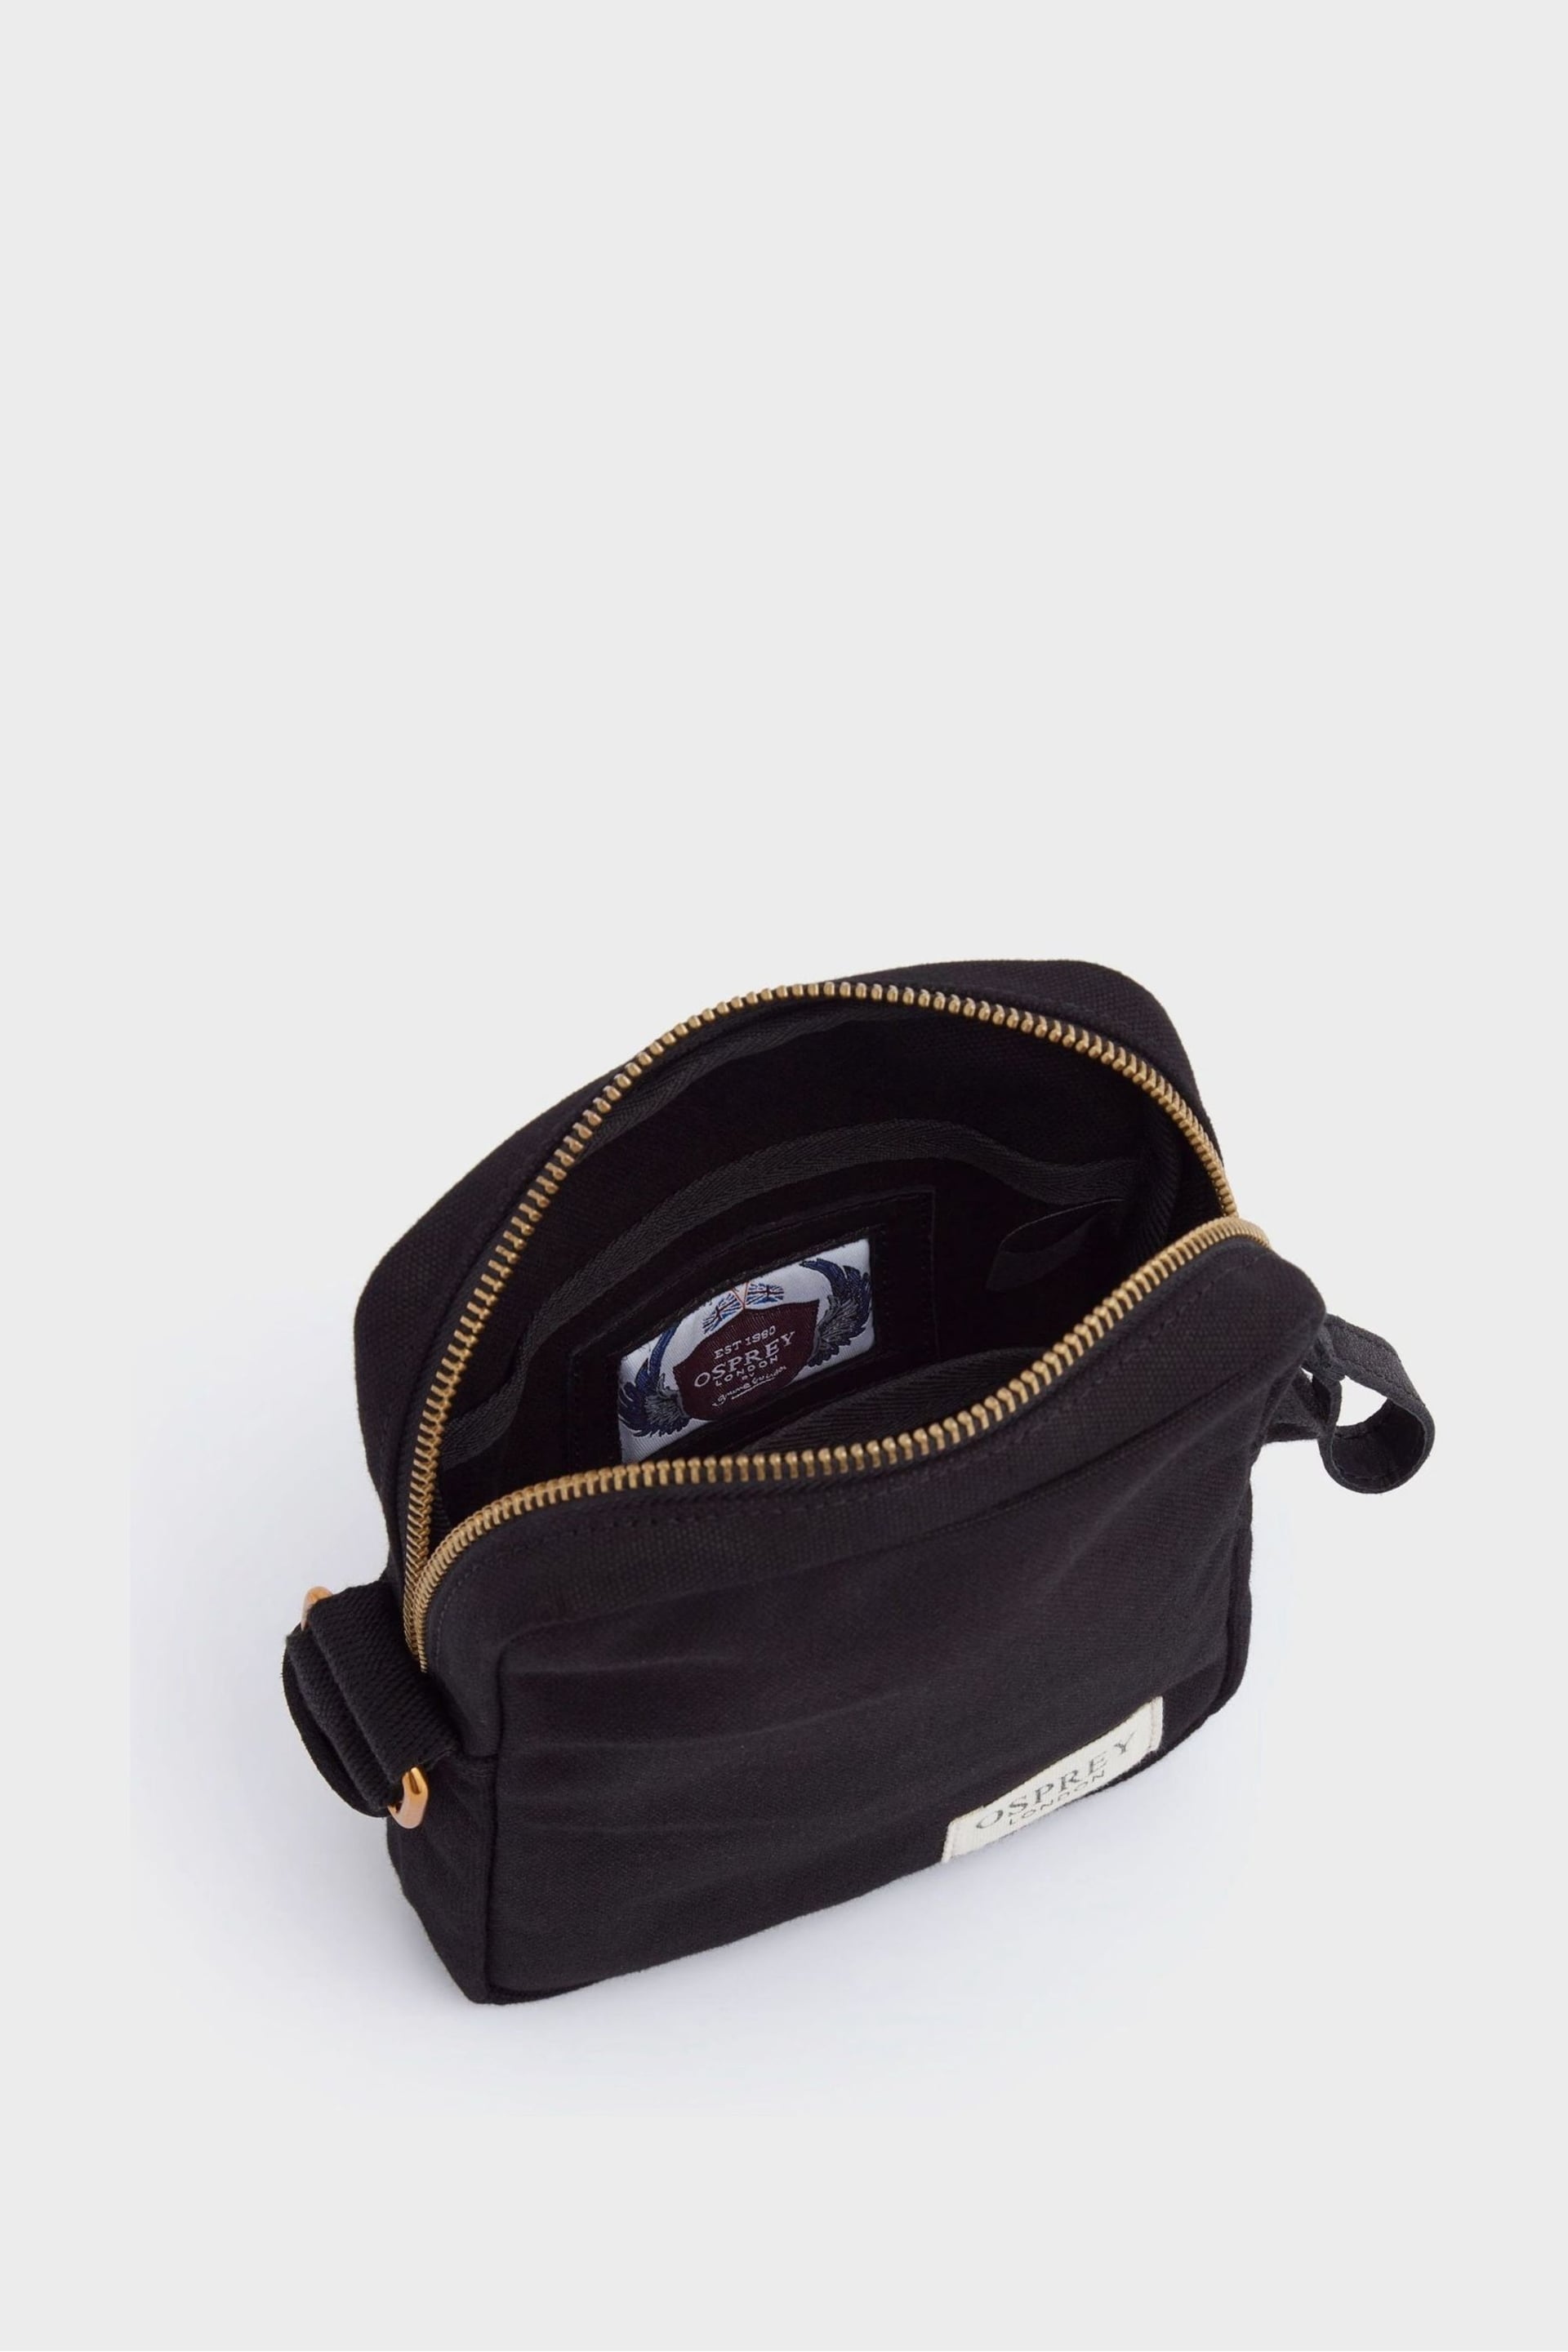 OSPREY LONDON The Studio Packable Phone Bag - Image 4 of 7